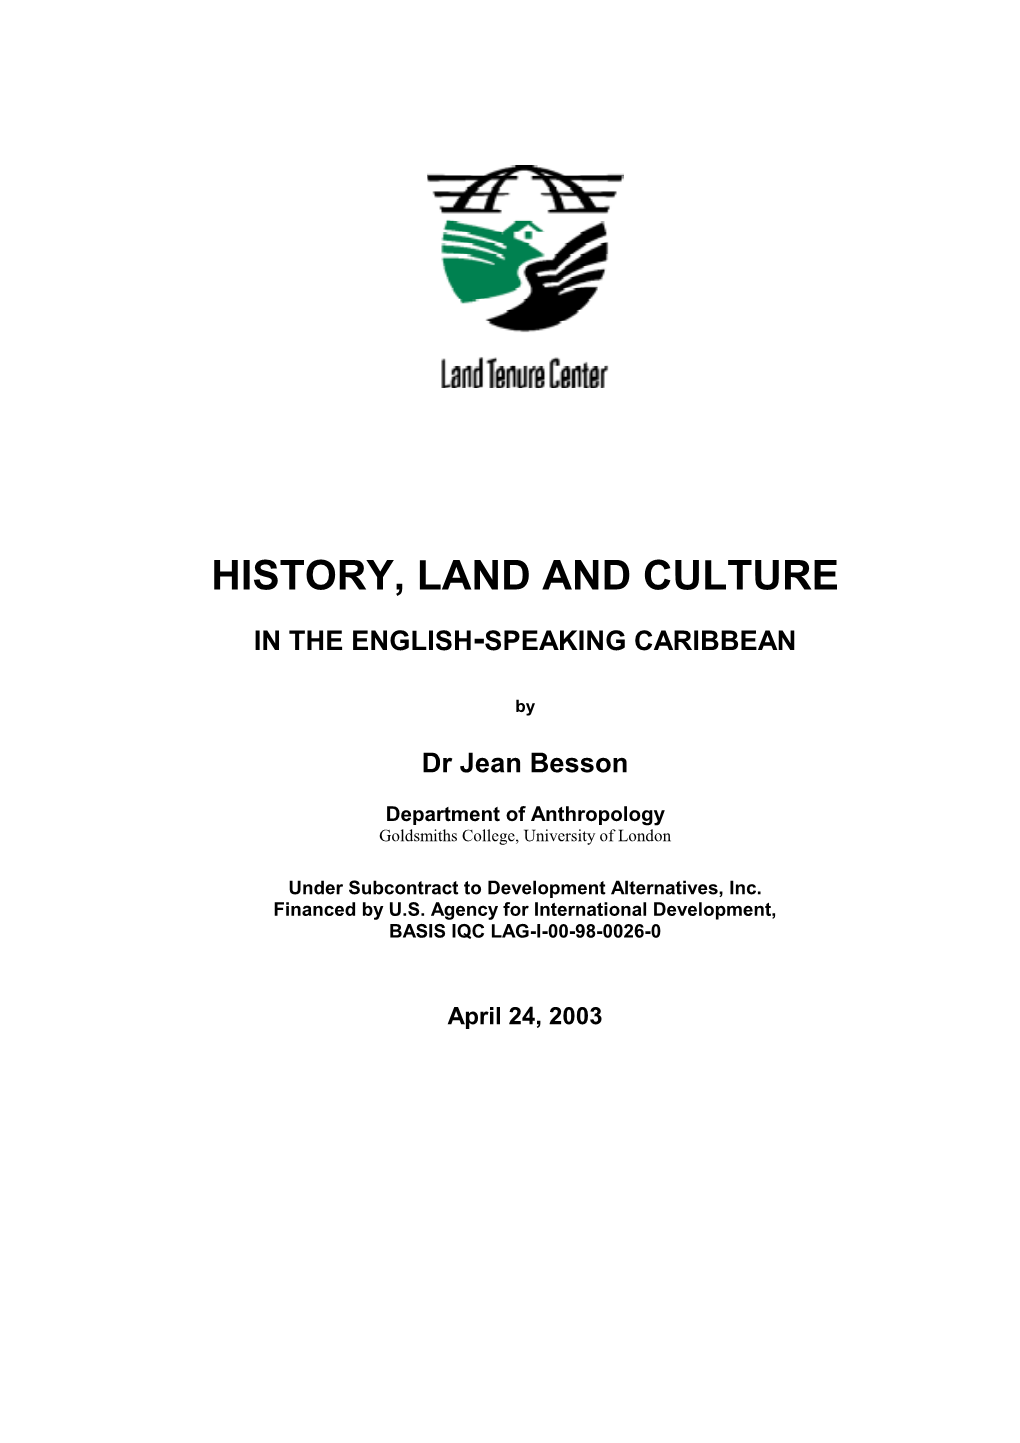 History, Land and Culture